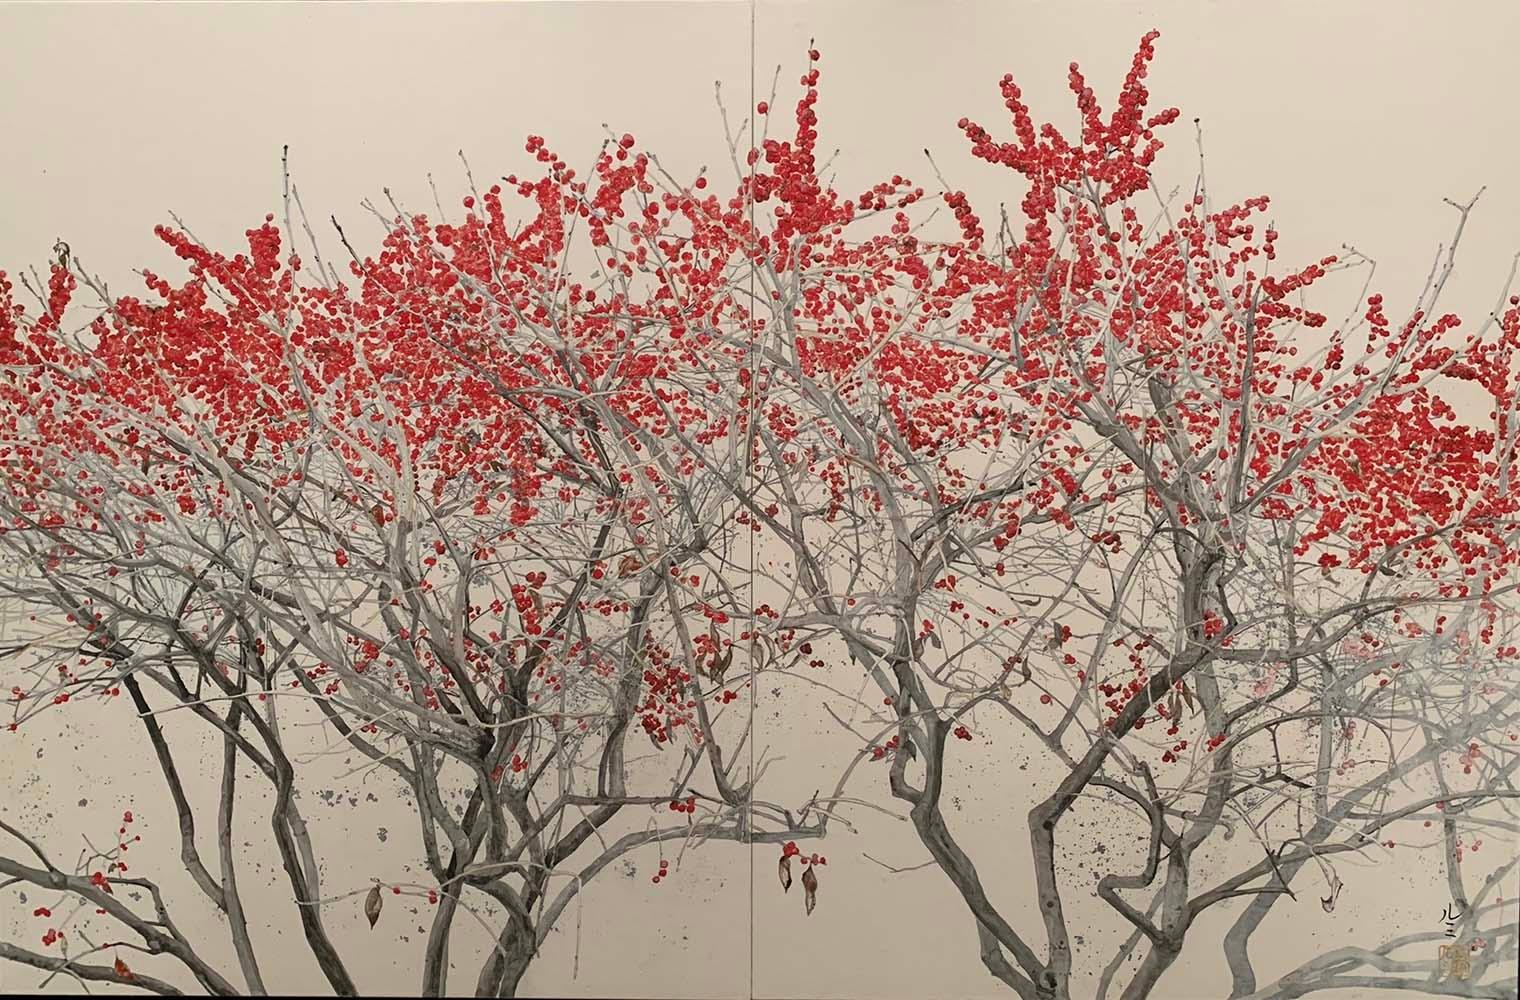 New York Landscape - The High Line IV is a unique diptych painting by contemporary artist Lumi Mizutani. The painting is made with pigments, Indian ink, silver leaf and black leaf on Japanese paper mounted on panel, dimensions are 65.2 × 100 cm